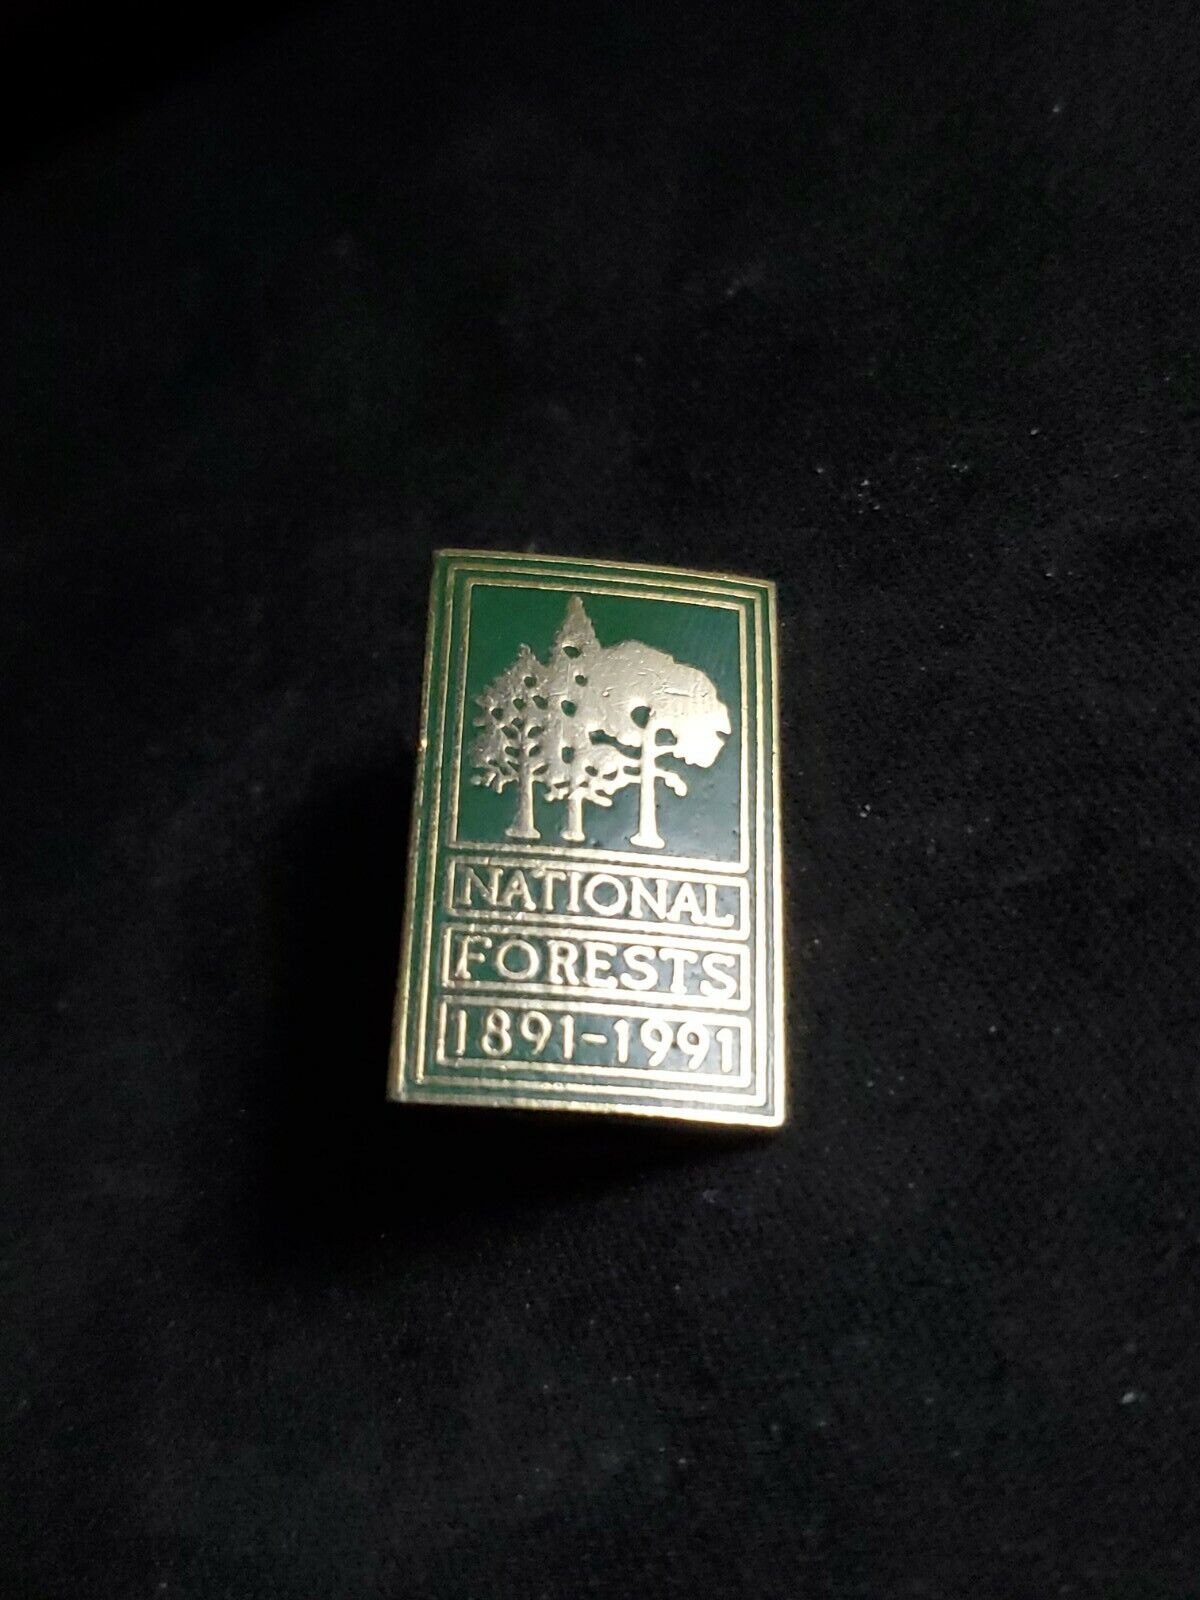 Vintage 1891-1991 National Forests Lapel Pin Centennial 100 Year Anniversary Bp